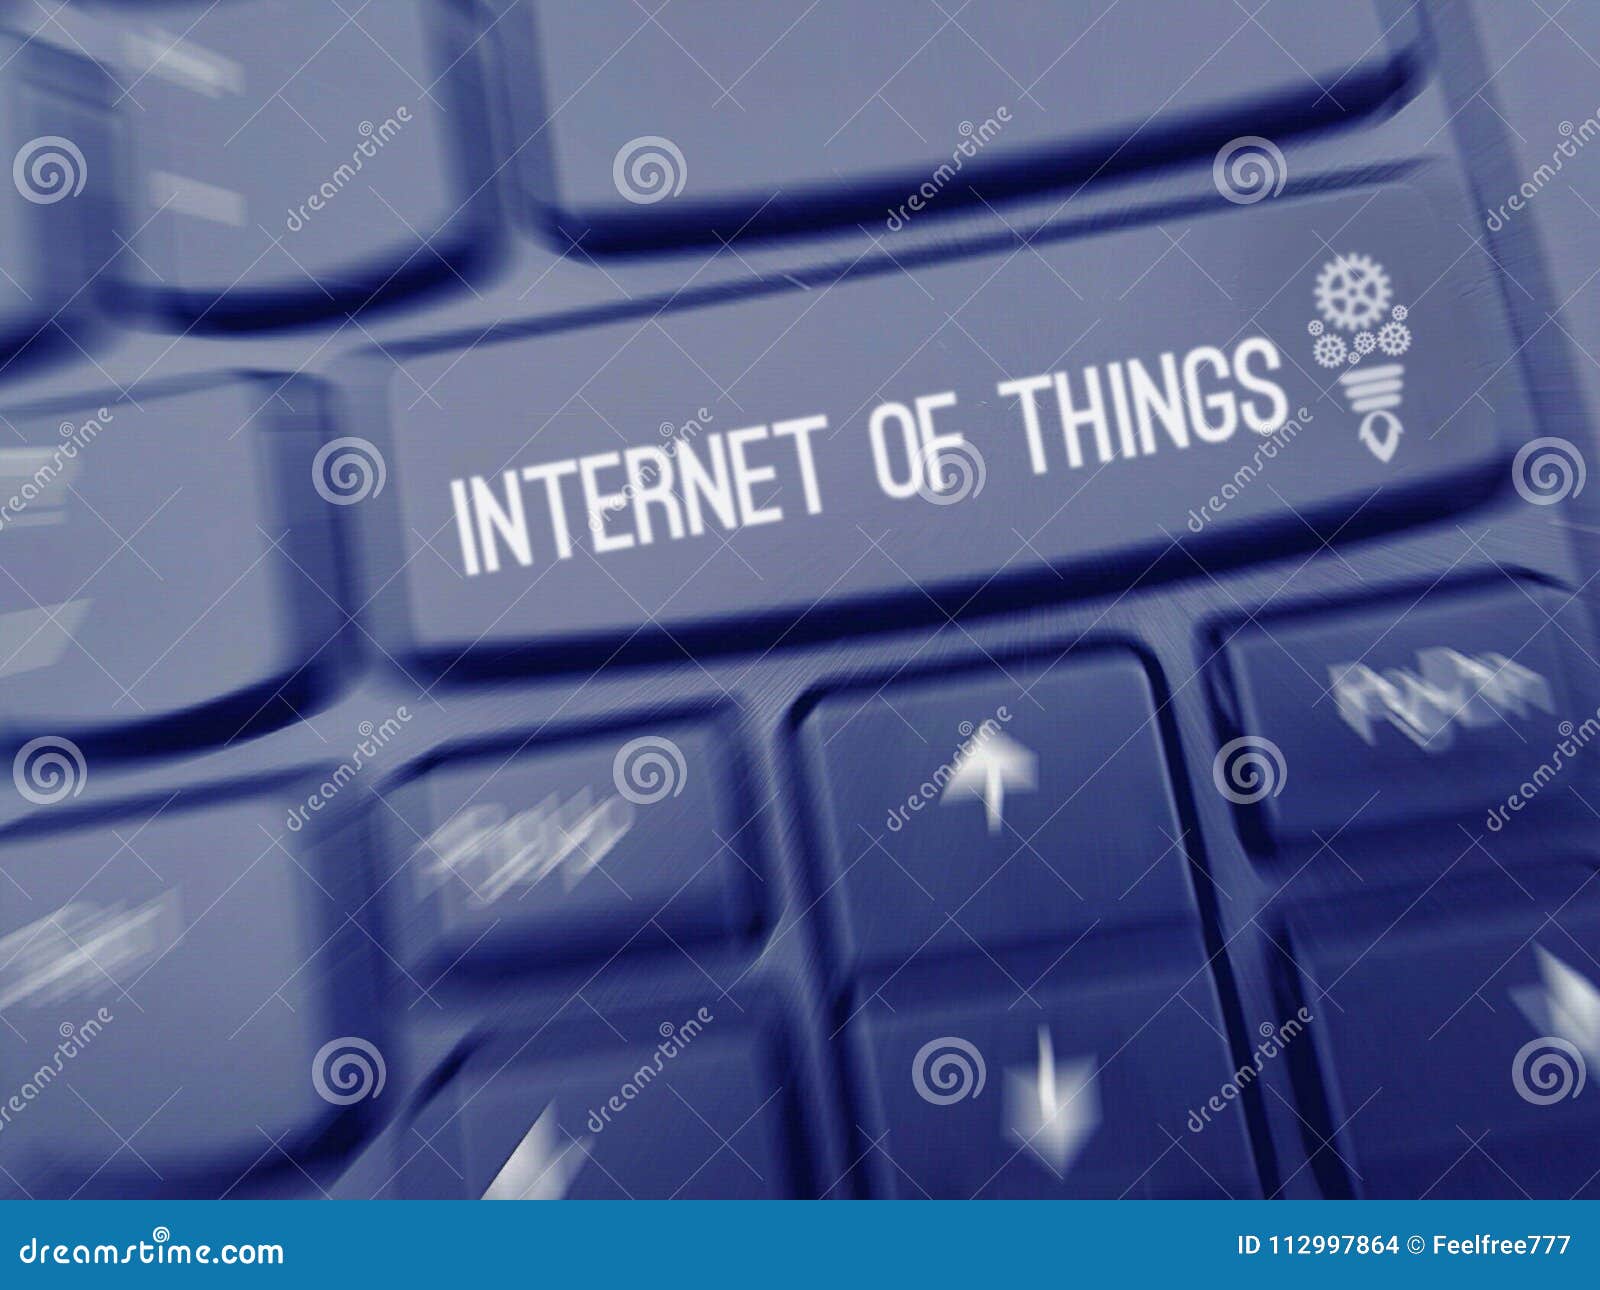 Internet Of Things Industrial Poster Stock Photo - Image ...